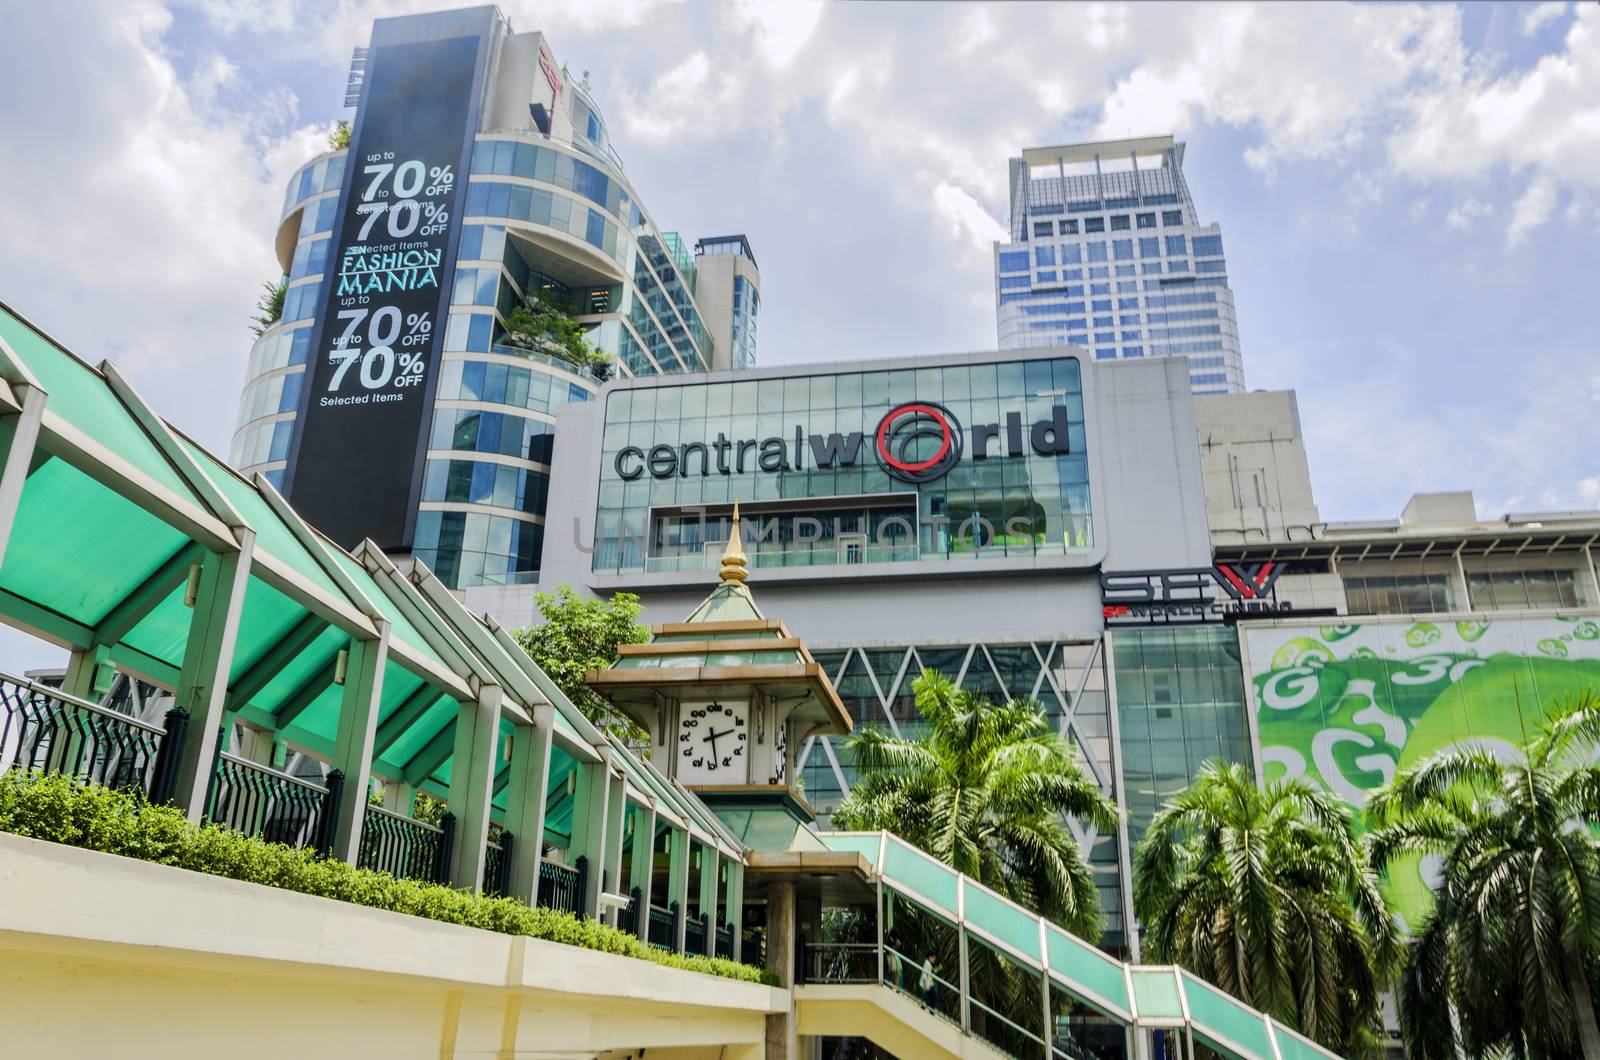 BANGKOK-MAY 26: Front view of Central World Shopping Center on May 19, 2013. It is a shopping plaza and complex in Bangkok which is the sixth largest shopping complex in the world